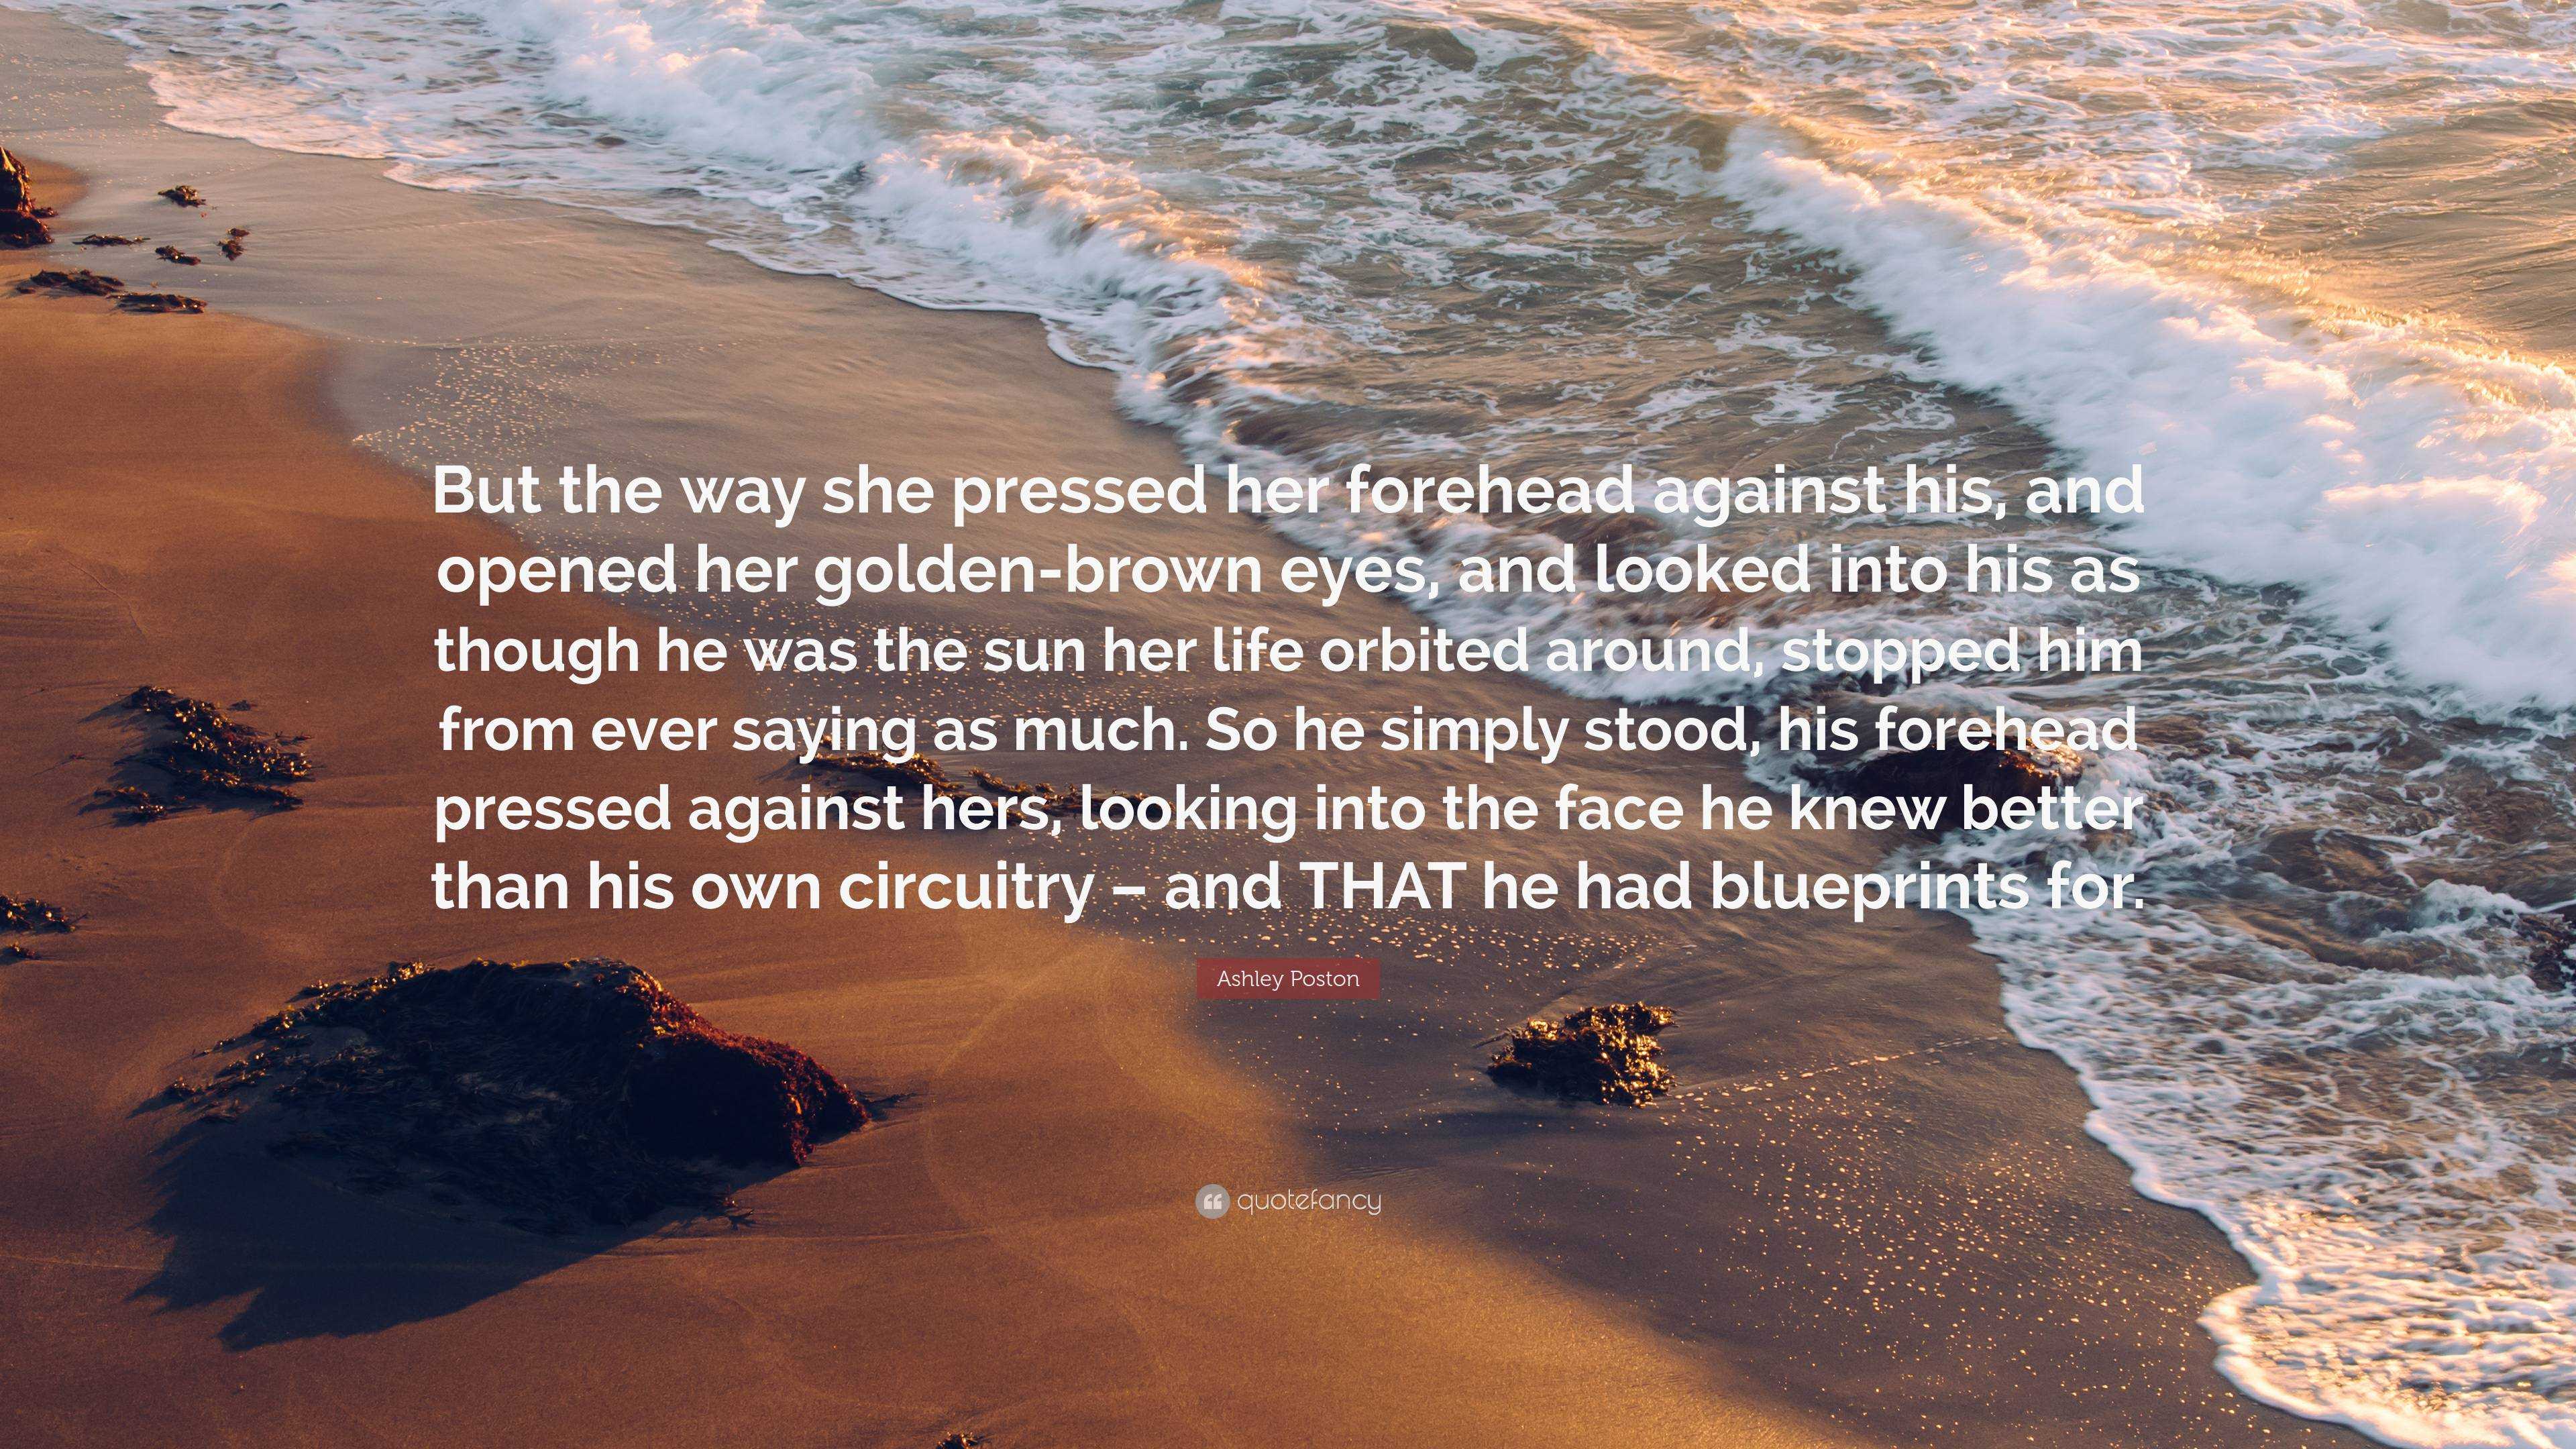 Ashley Poston Quote: “But the way she pressed her forehead against his ...